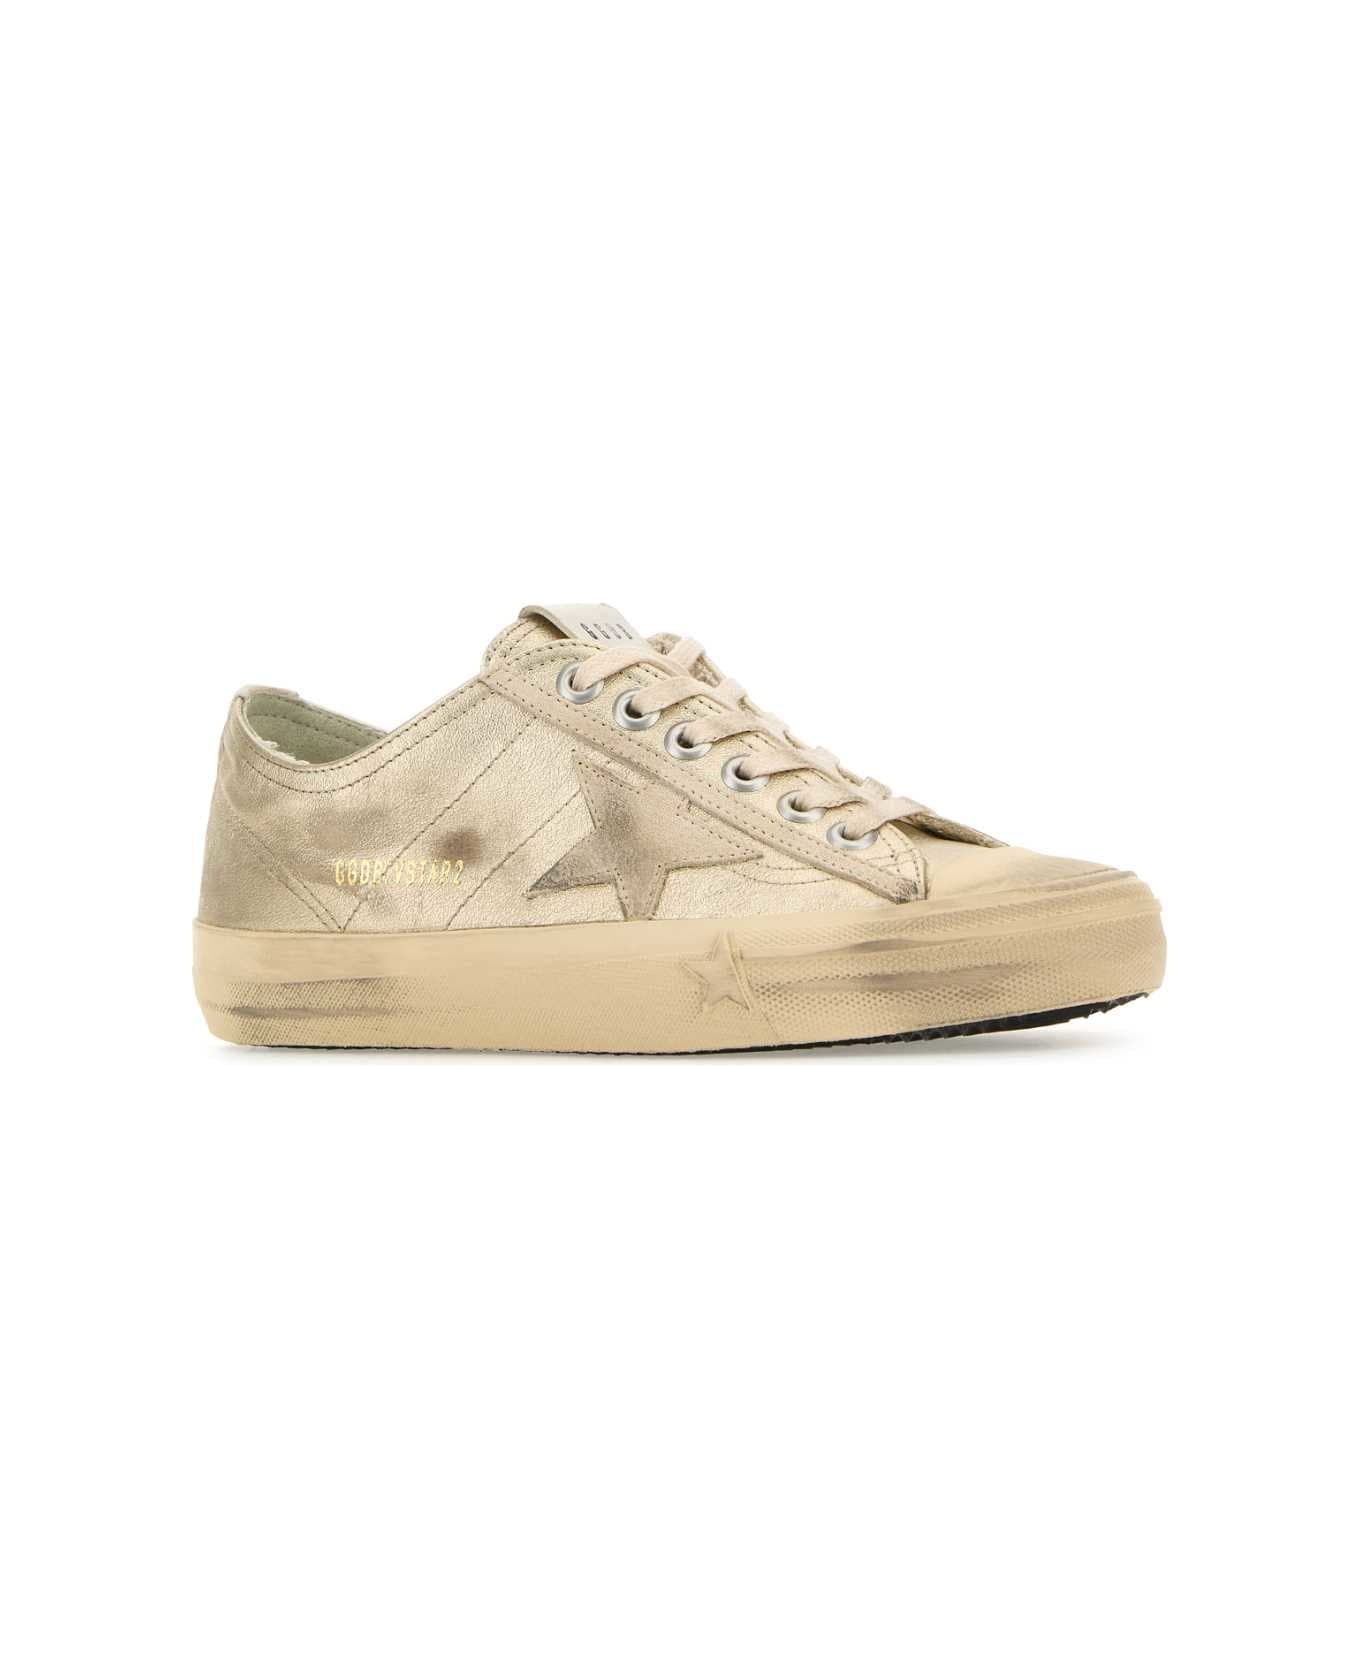 Gold Leather V-star 2 Sneakers - 2